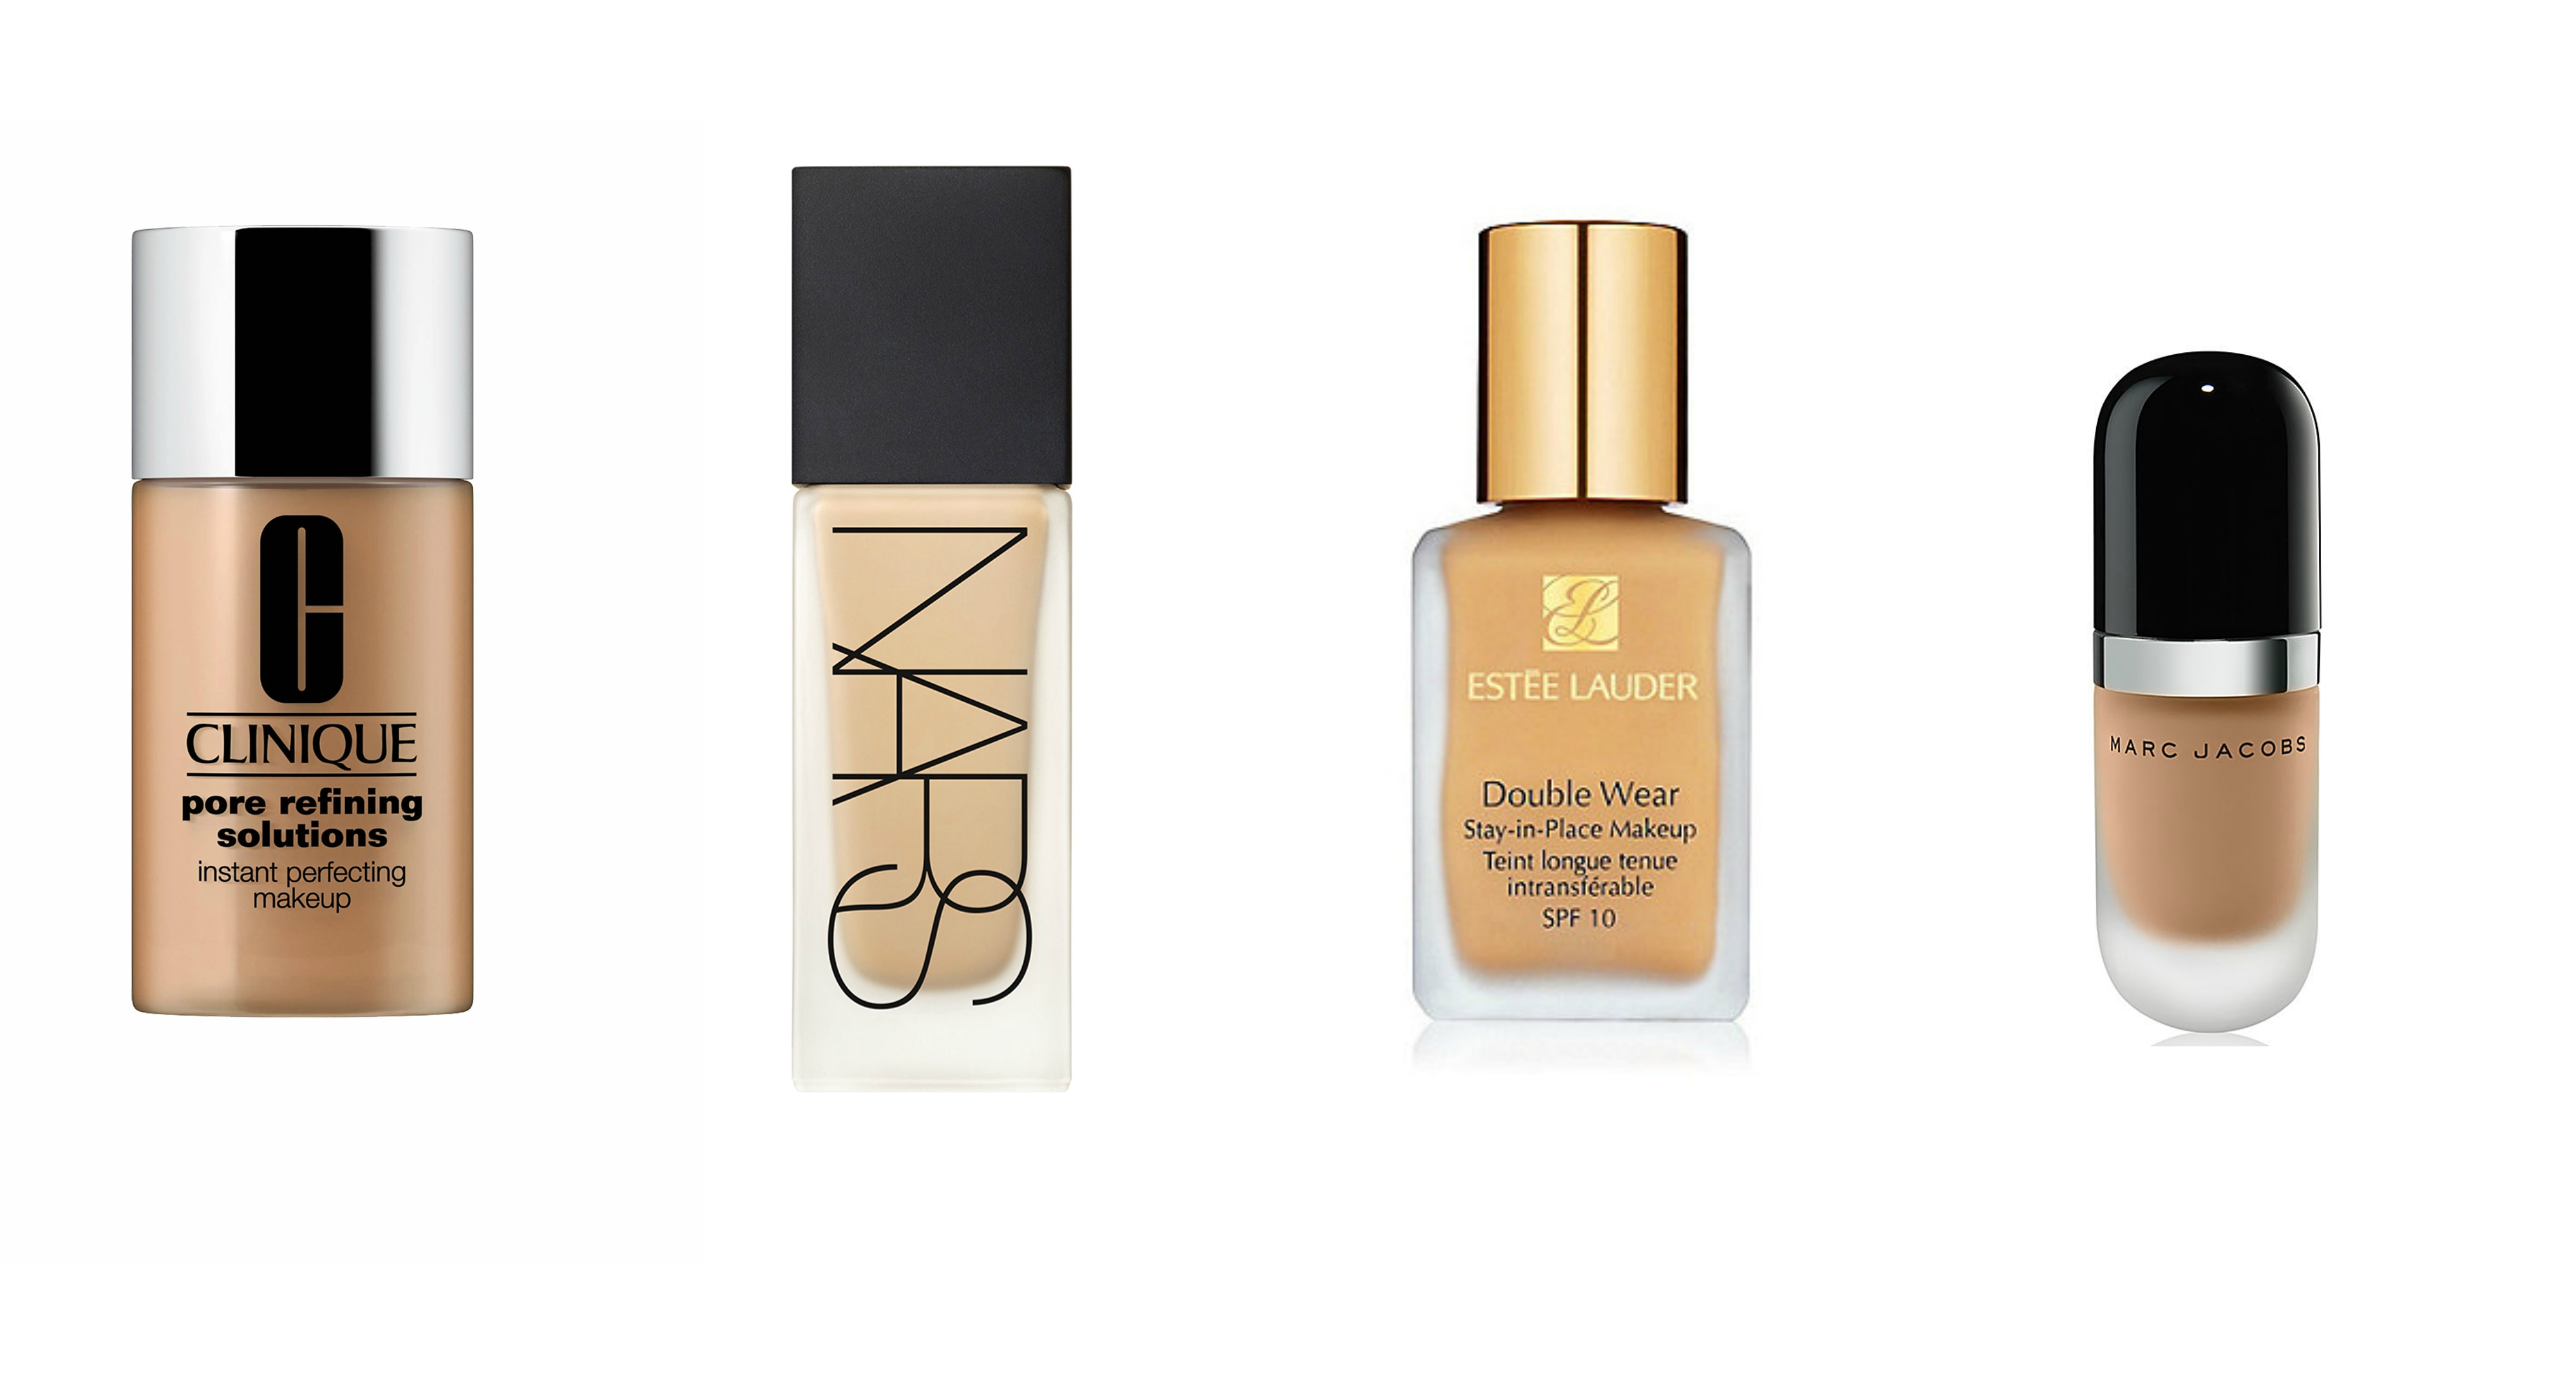 best foundation for pores and oily skin